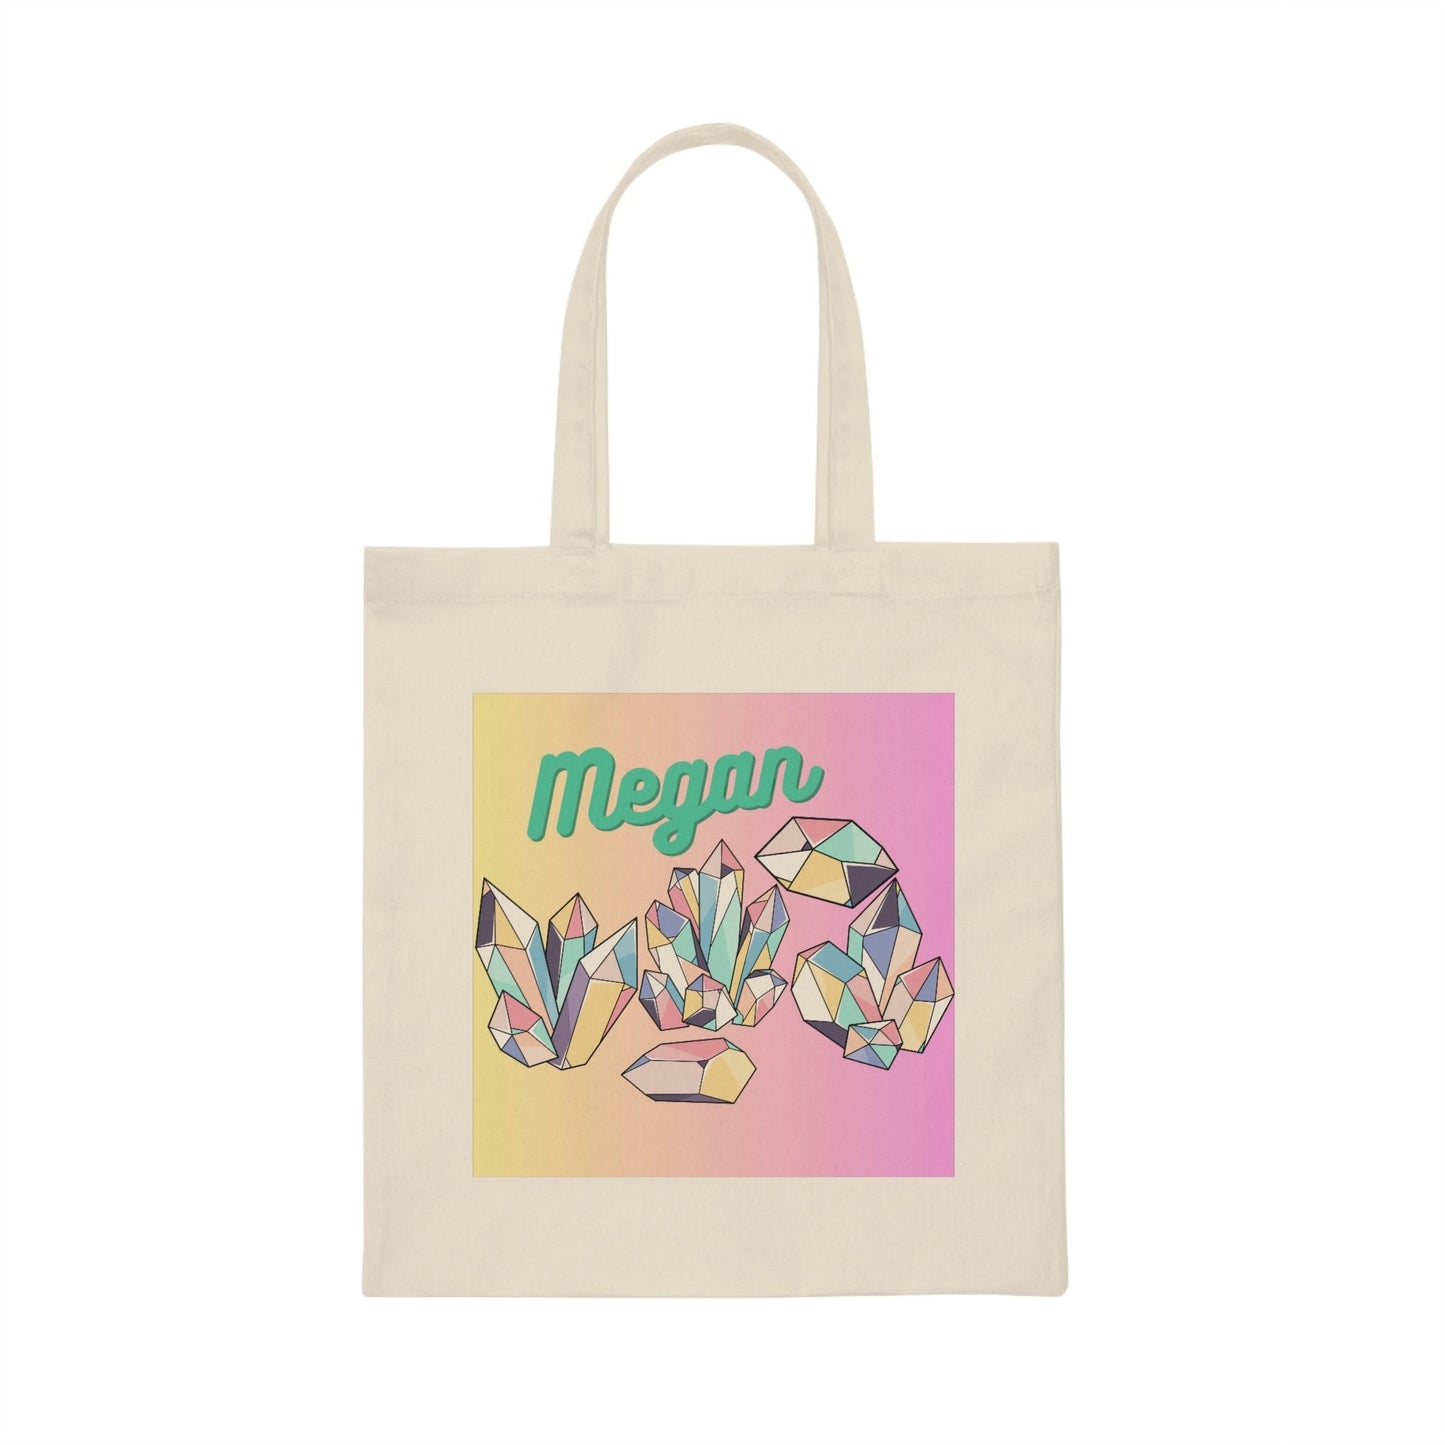 Crystal Rainbow Personalized Canvas Tote Bag